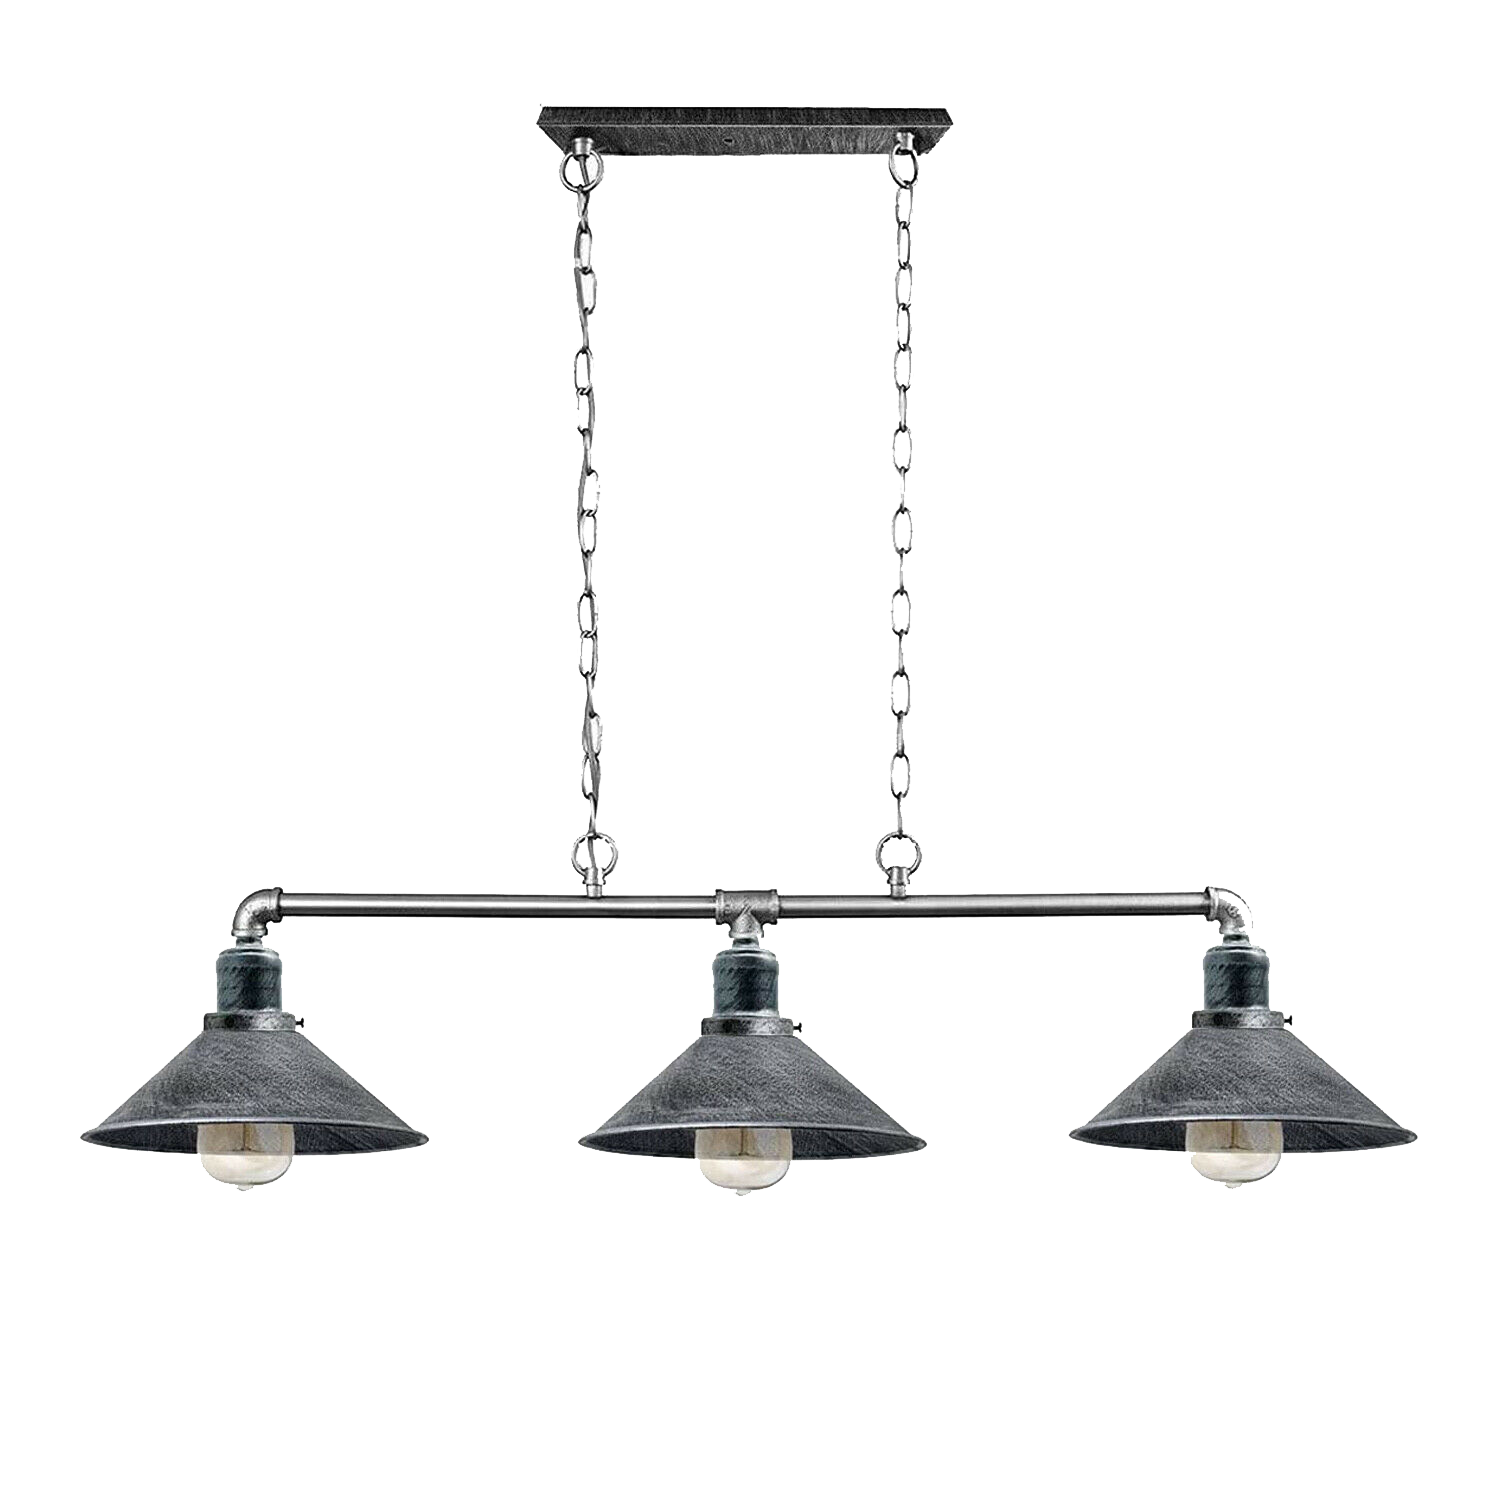 Modern Vintage Retro Brushed Silver 3 Way Pipe Ceiling Light